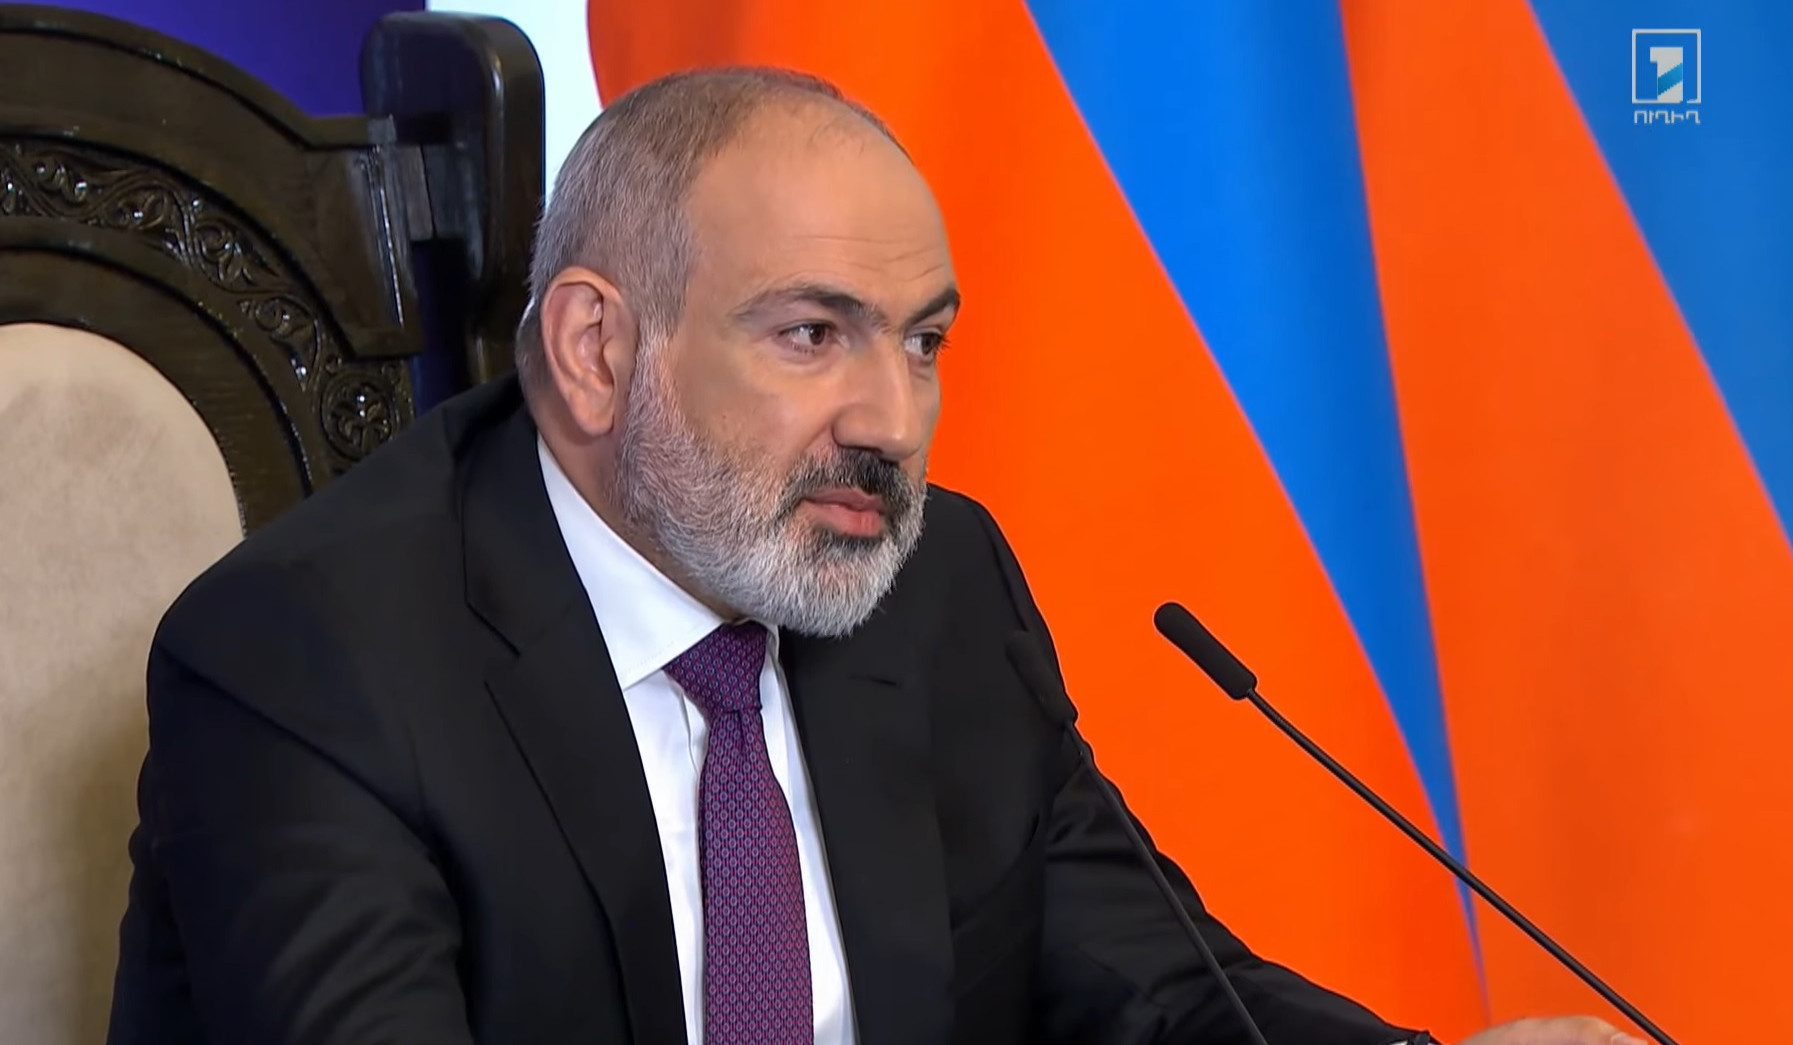 Armenia can’t afford to come under Western sanctions: Pashinyan